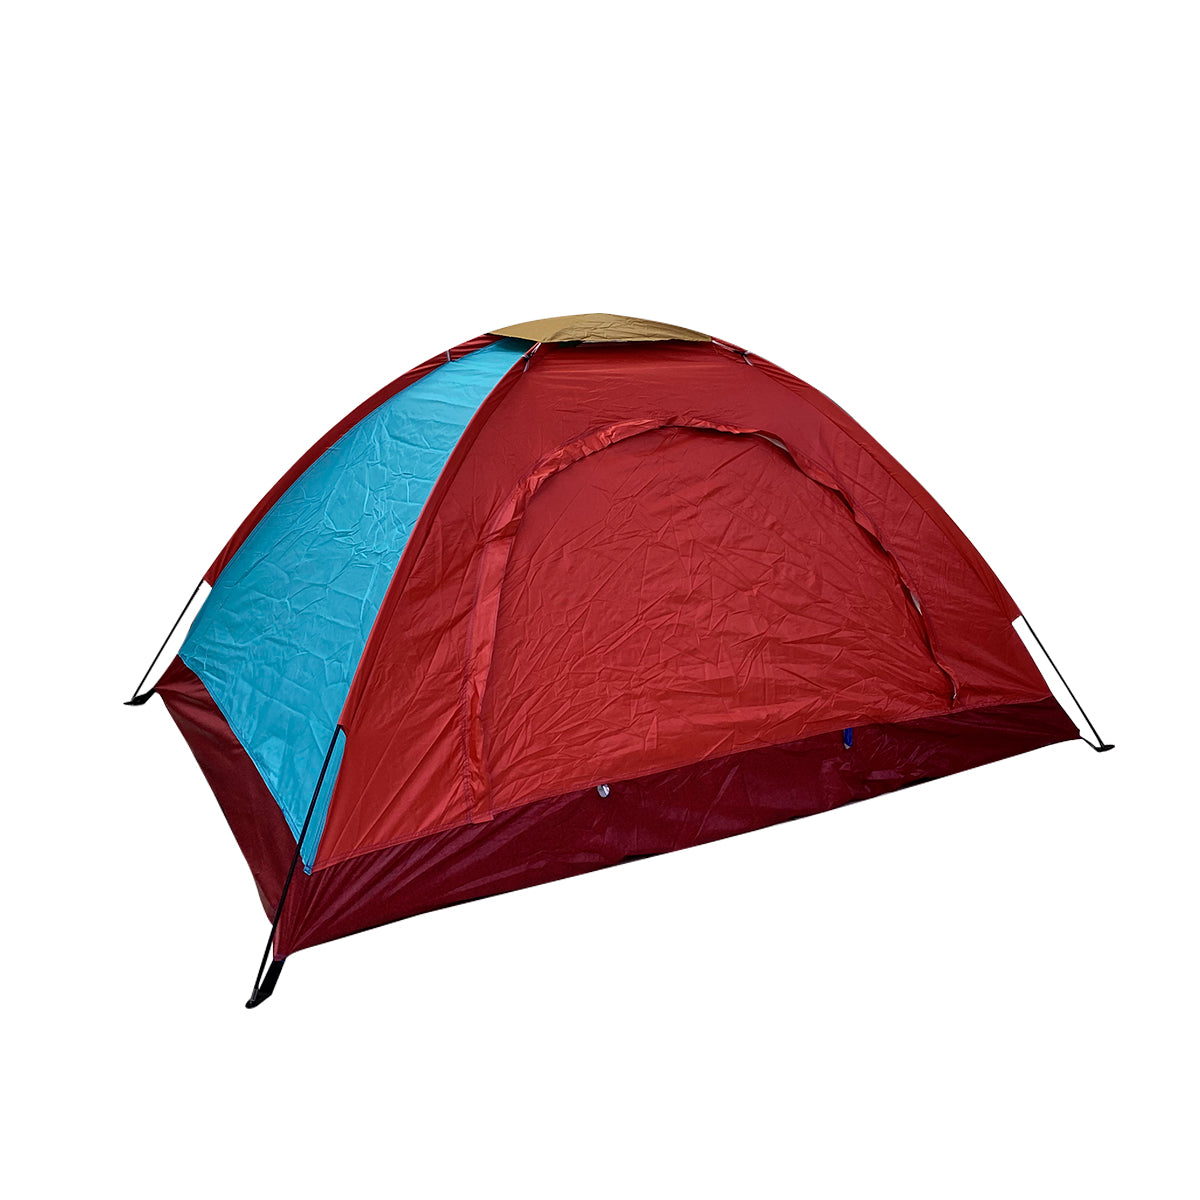 Carpa Camping Armable Semi Impermeable 3 Personas MJ-051